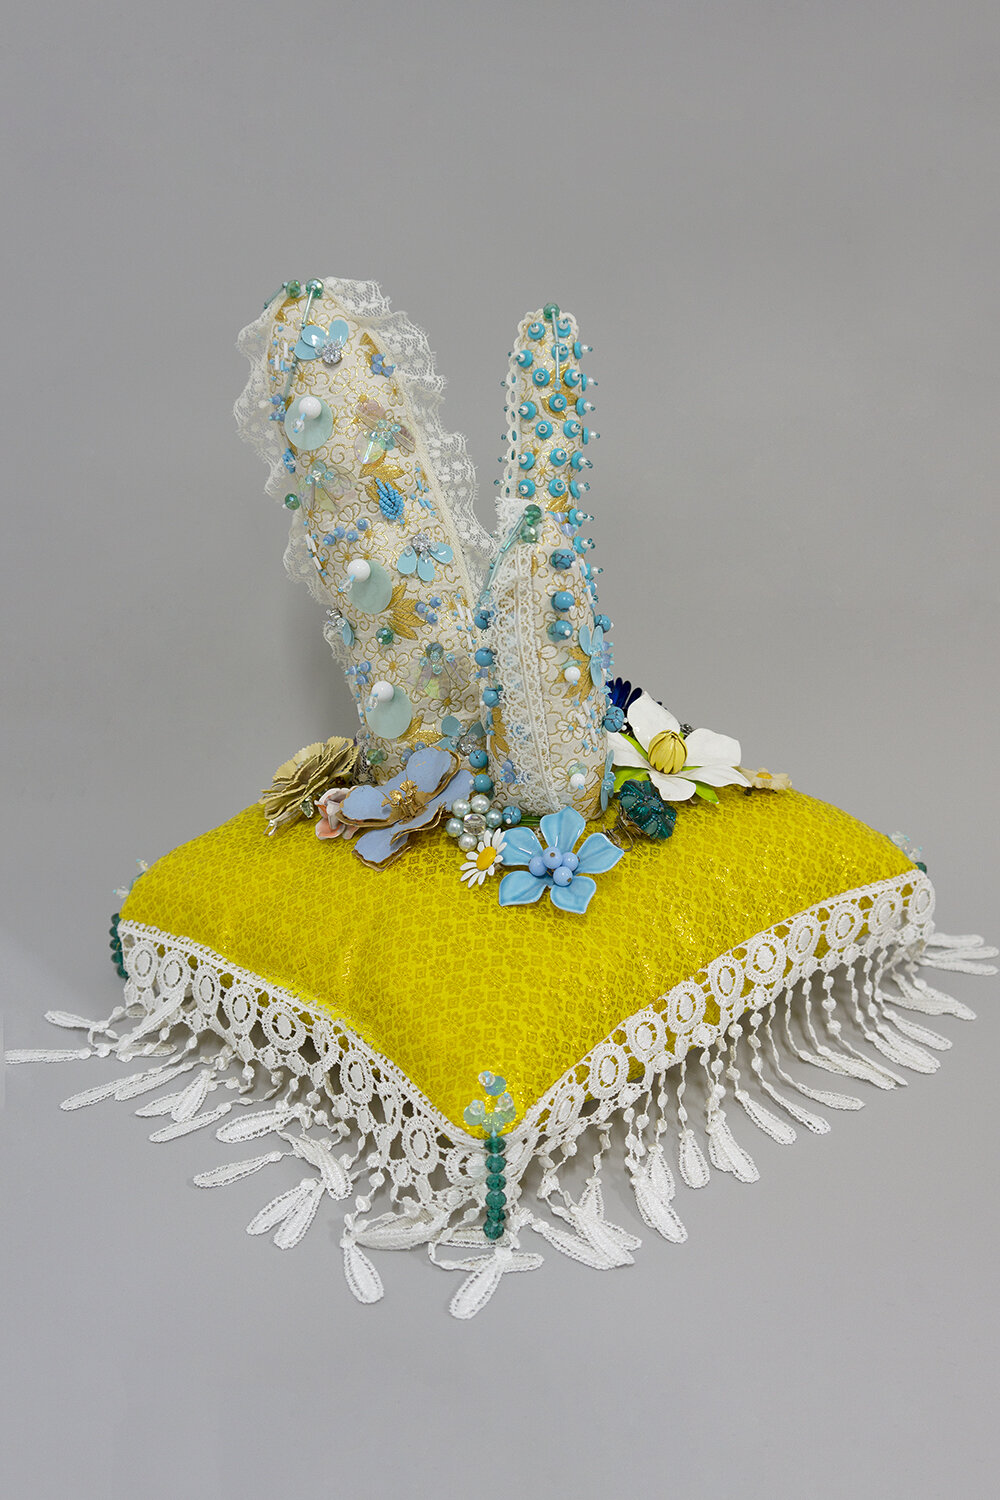   Privilege , 2018, Crystal and plastic beads, sequins, found fabric, trim, costume jewelry, polyester batting, thread, 15 x 11.5 x 11.5” 